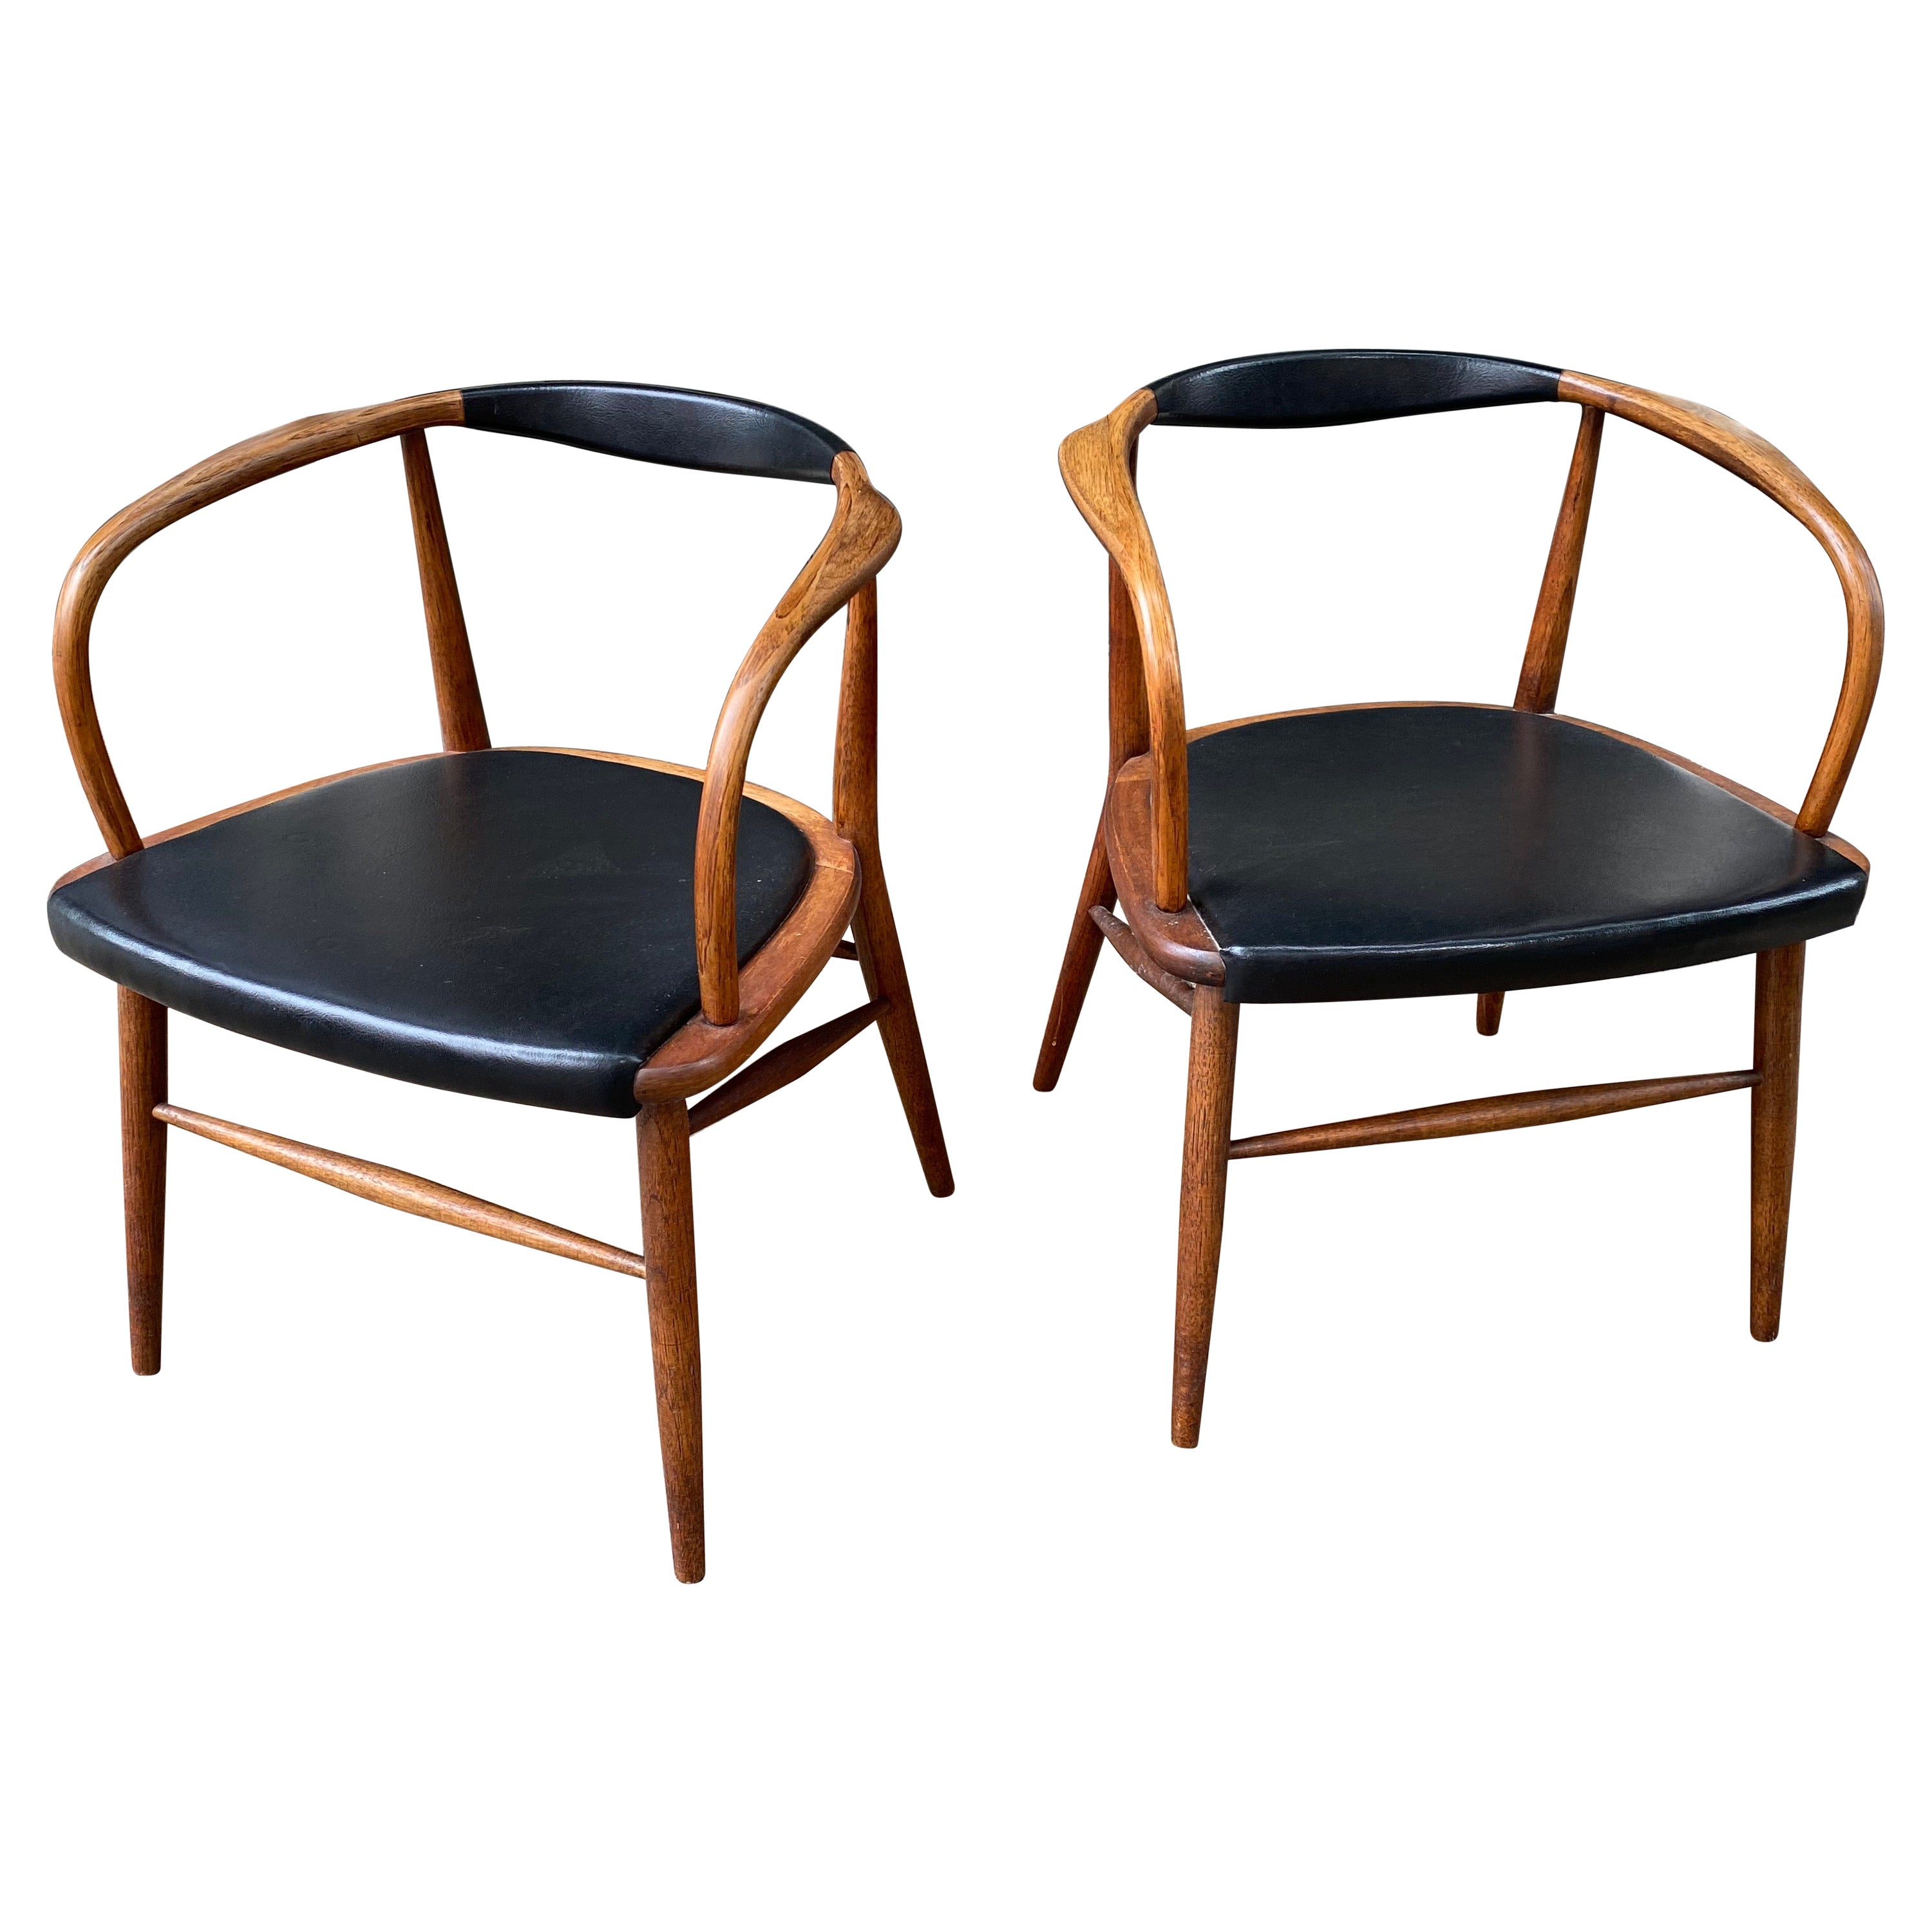 Lawrence Peabody Pair of Armchairs